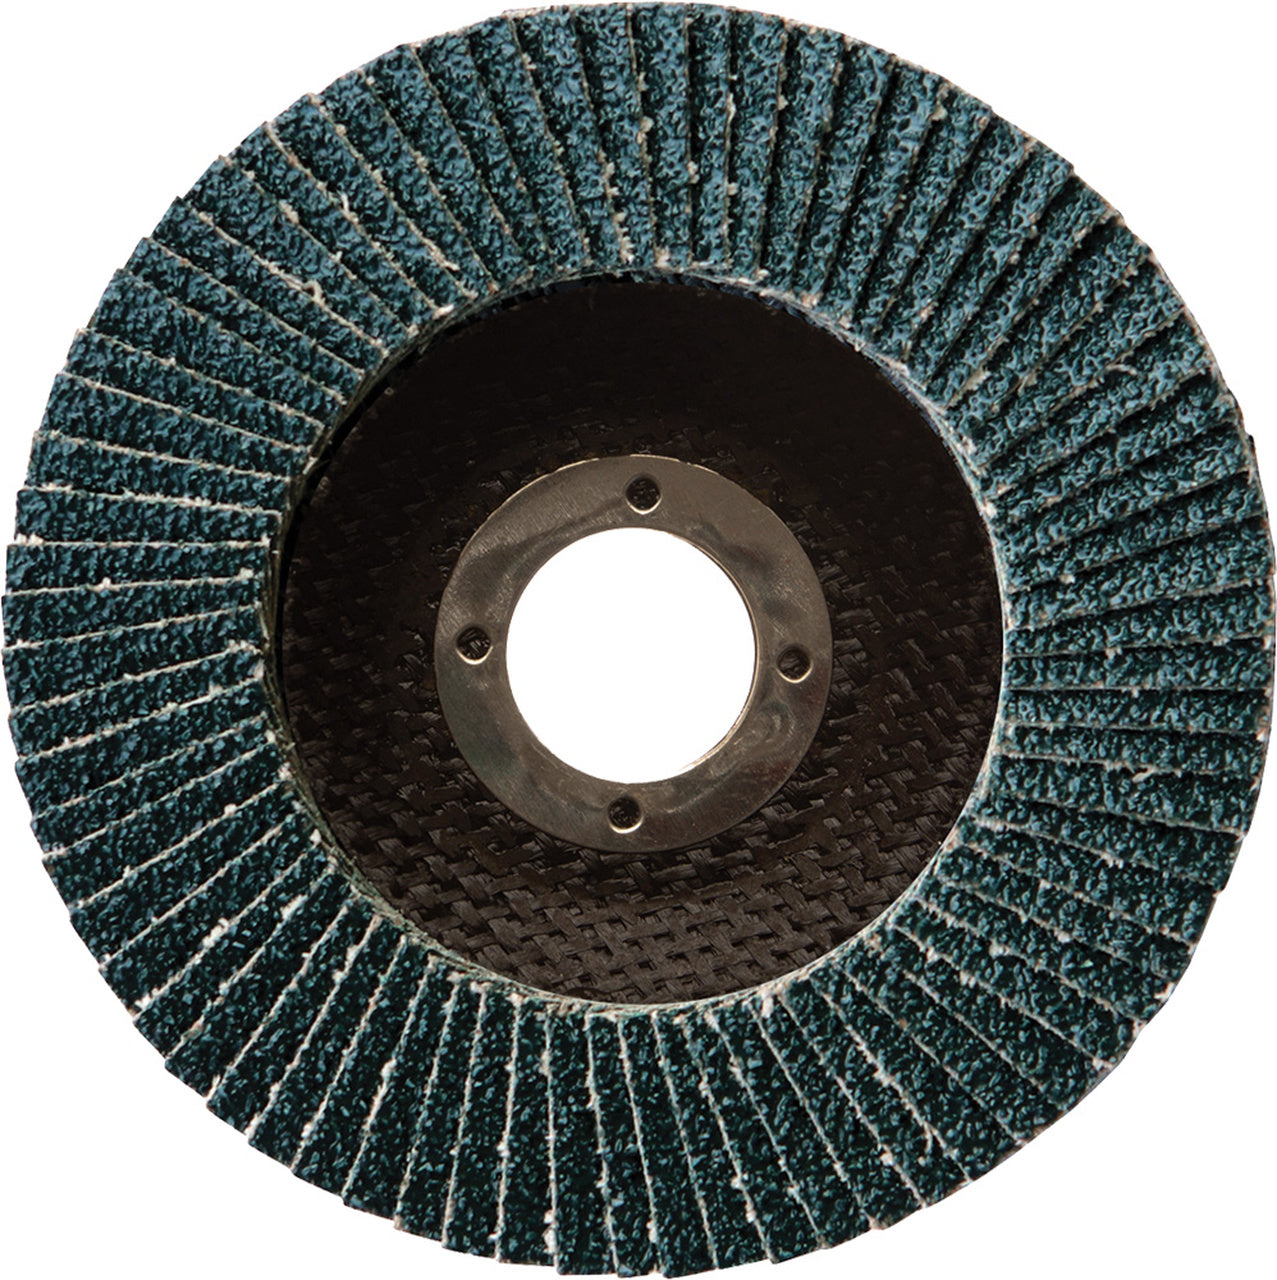 Gemtex Abrasives 712950080 5" 80 Grit Premium Angle Face Zirconia Flap Discs, Type 29, 7/8" Hole, Pack of 5 - MPR Tools & Equipment